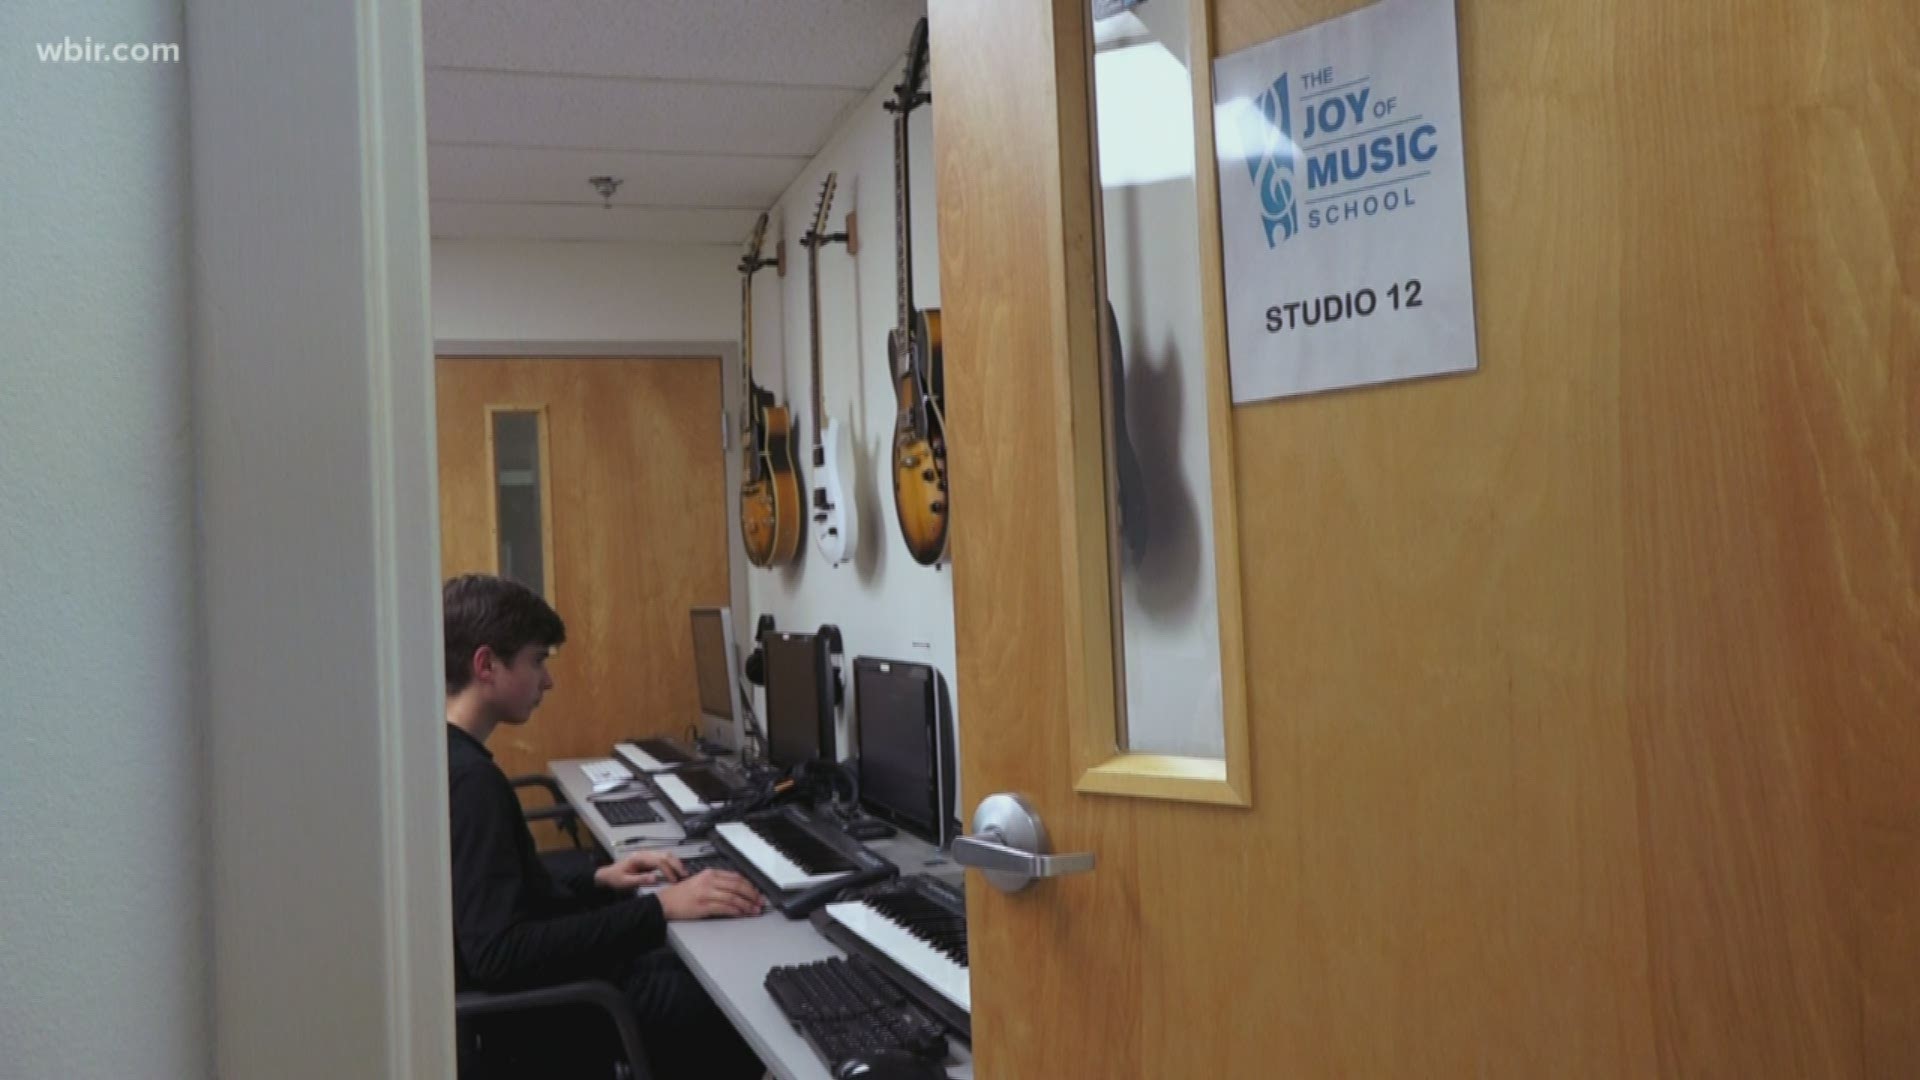 A Student at the Joy of Music school will soon hear professional musicians perform a song that he wrote on the computer, joyofmusicschool.org.  Feb.3, 2020-4pm